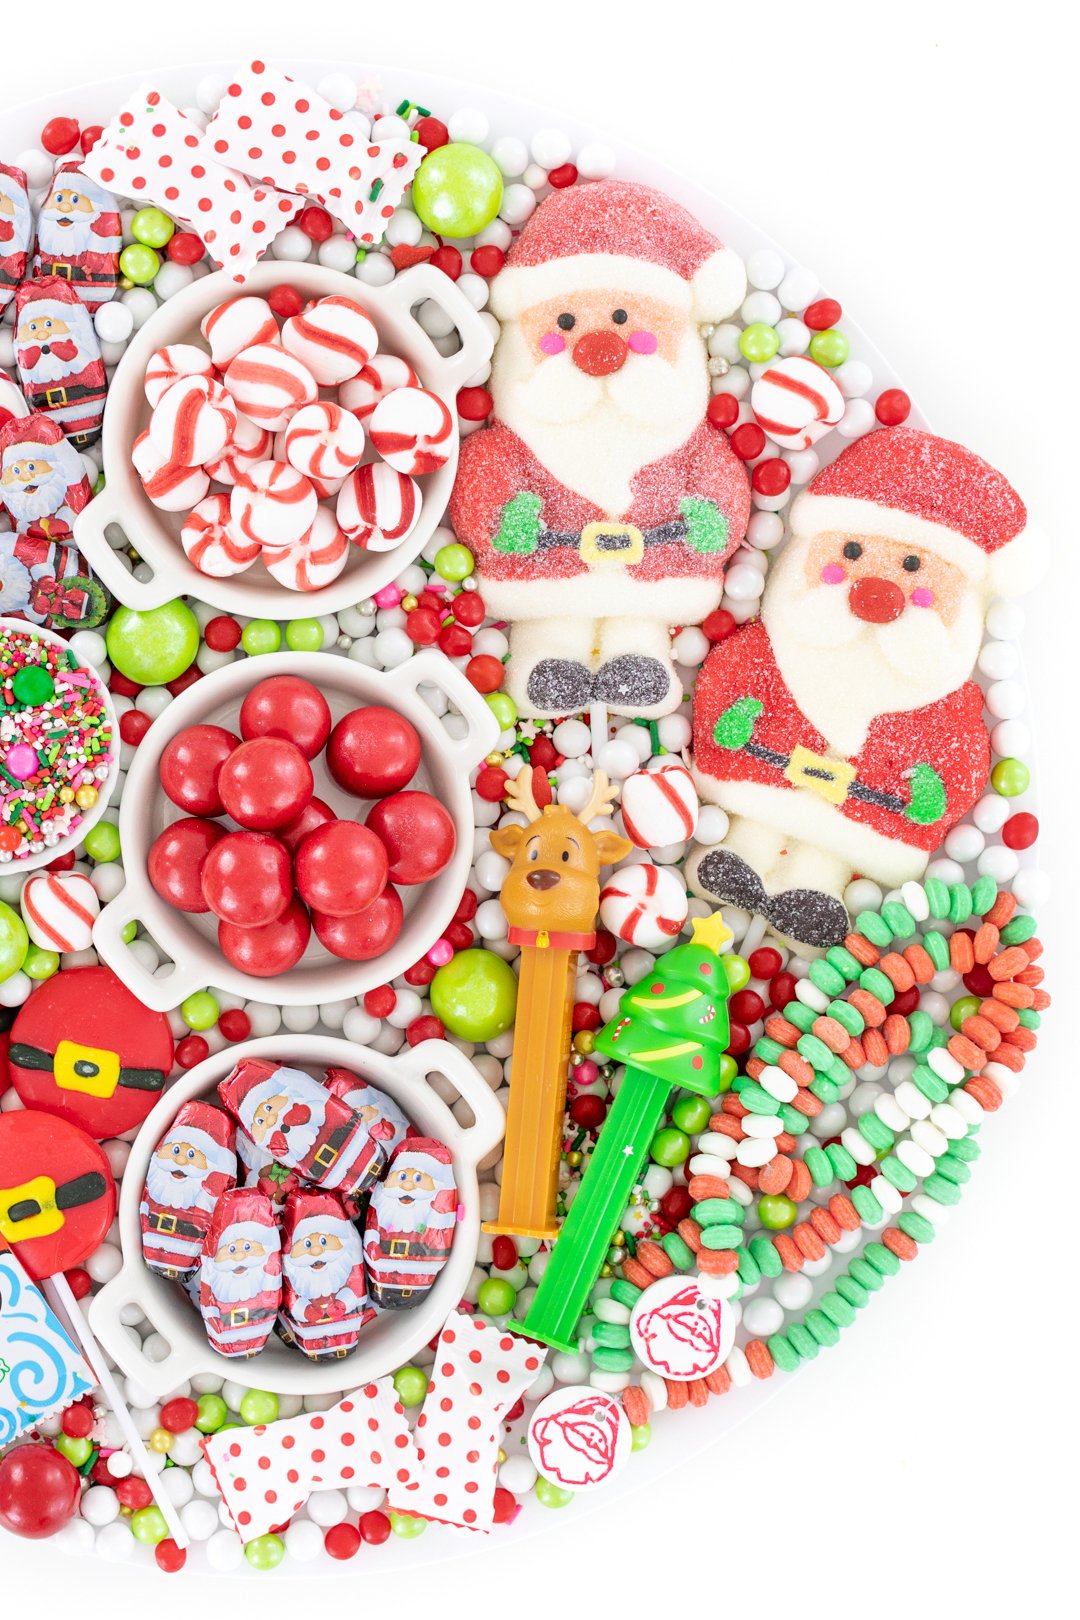 christmas candy board with a heavy lean towards santa candies. chocolates, gumballs, pez dispensers